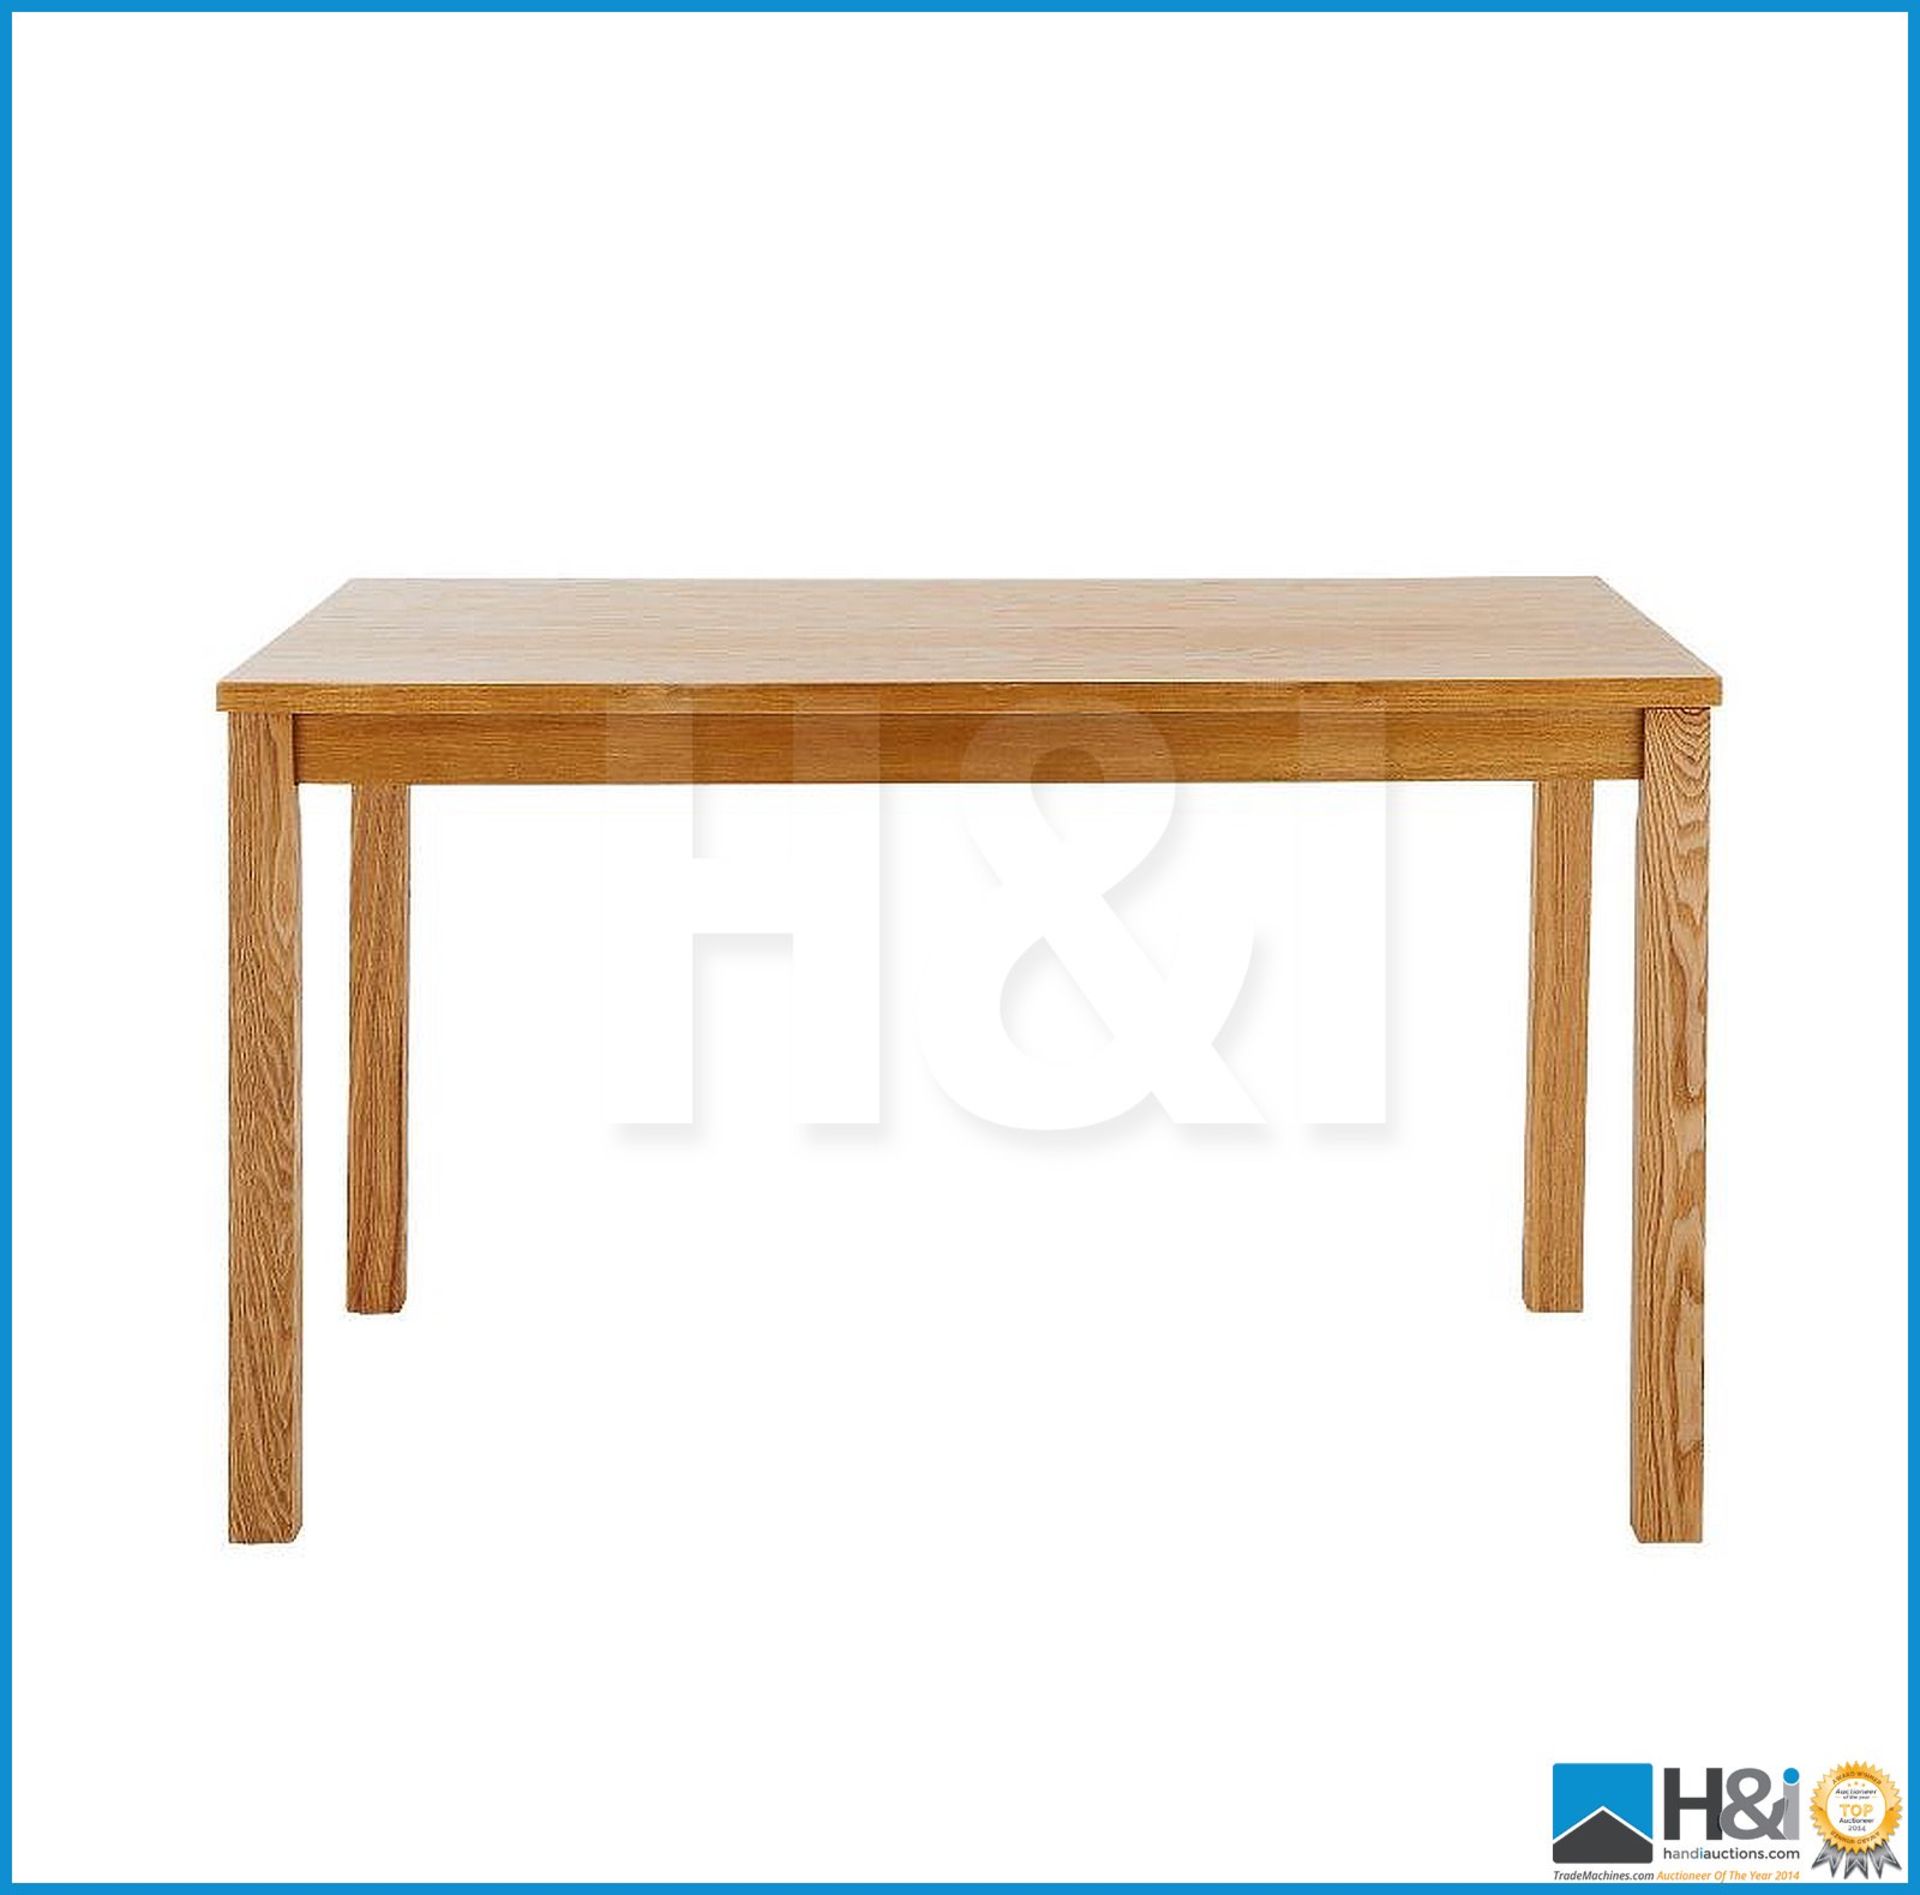 NEW IN BOX PRIMO DINING TABLE [OAK] 74 x 90 x 150cm RRP GBP 191